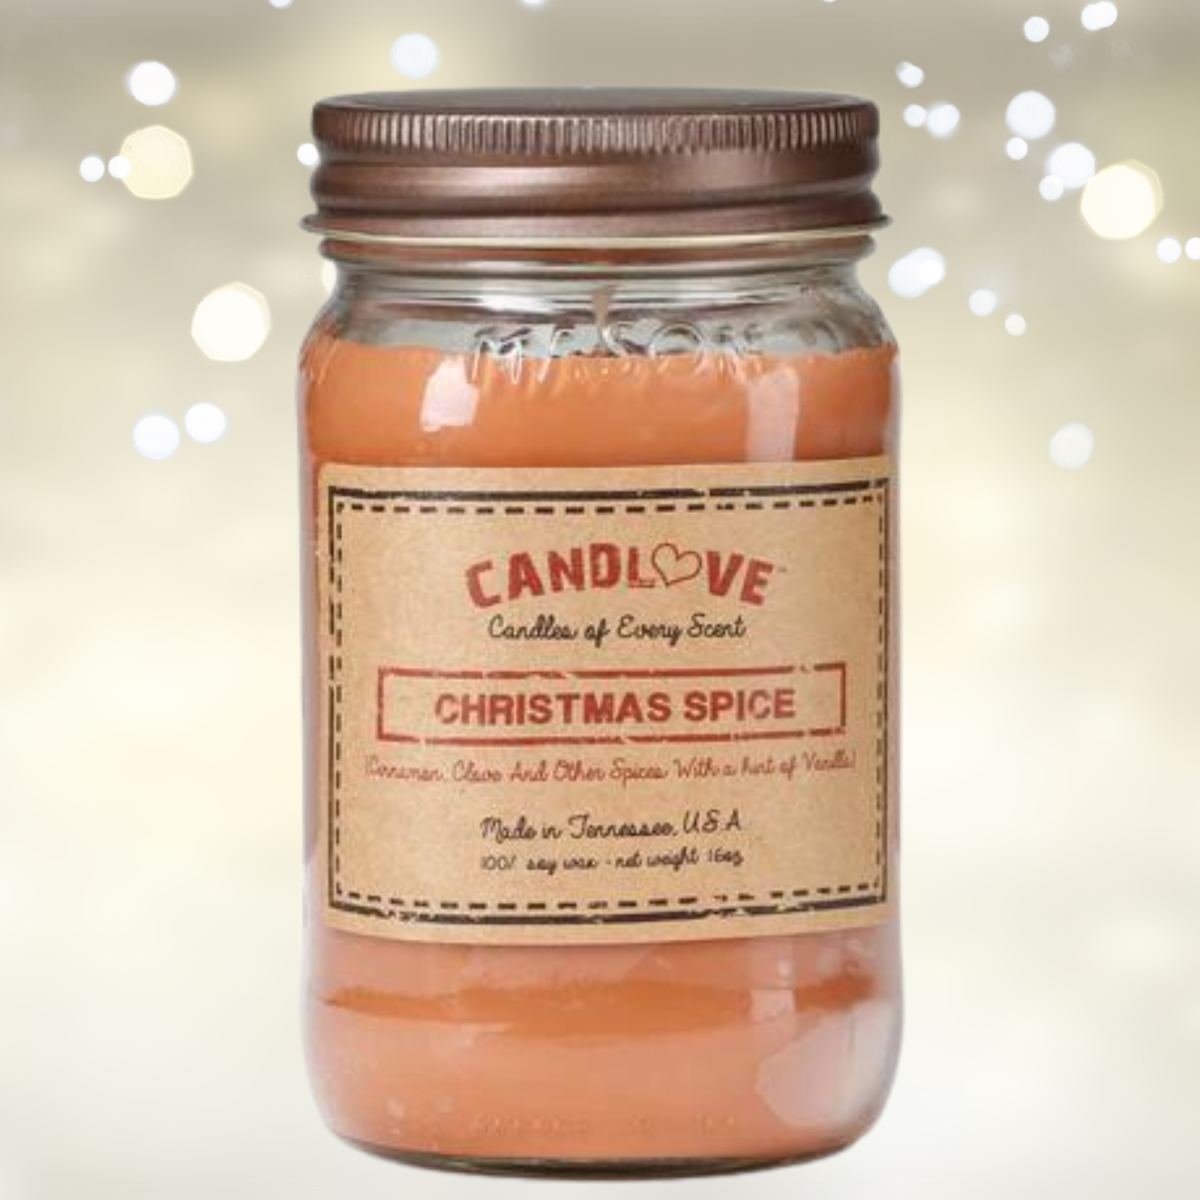 Picture of PPI SUPPLIES Christmas-S-C Candlove Christmas Spice Scented Candle - Non-Toxic 100% Soy Candle - Handmade & Hand Poured Long Burning Candle - Highly Scented All Natural Clean Burning Candle (16 OZ Mason Jar) Made in The USA